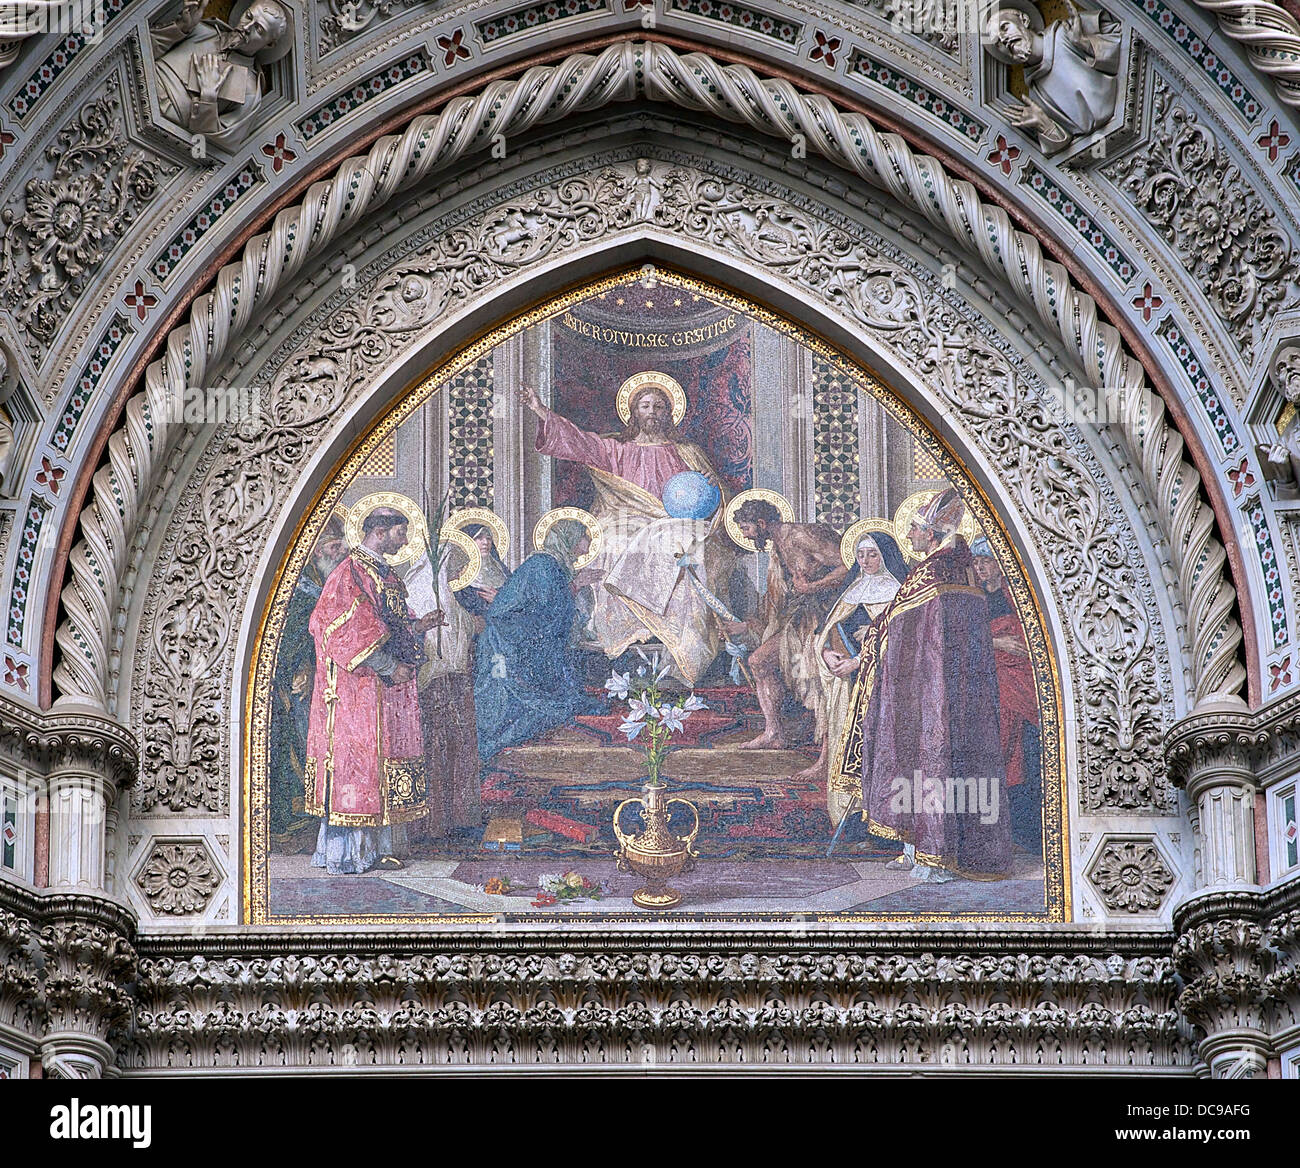 The 19th century gothic revival mosaic of the central tympanum (above the main gate) of the cathedral Santa Maria del Fiore in Stock Photo